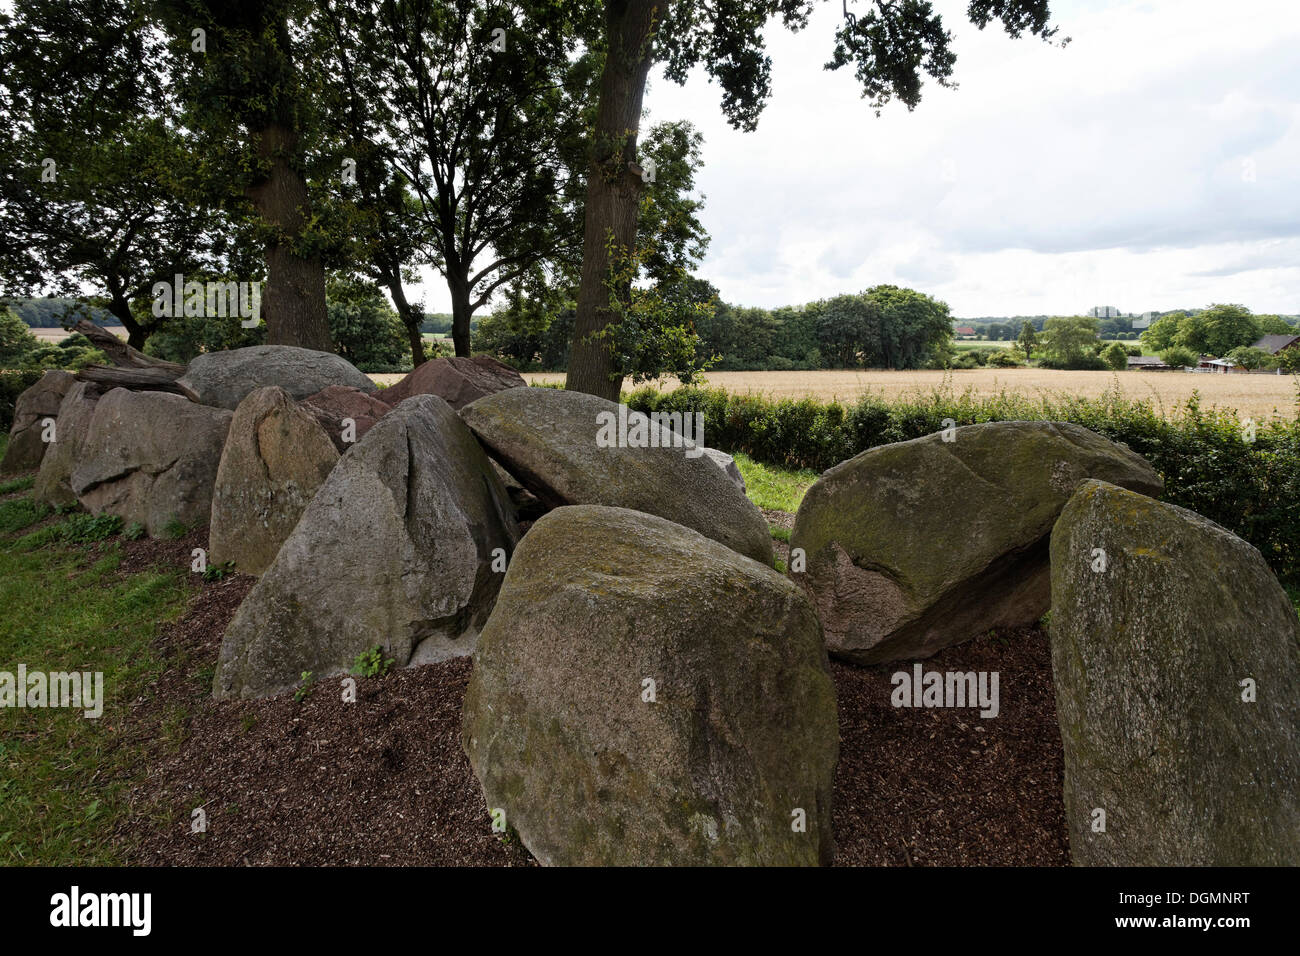 Jeggen megalithic grave, burial site from the Neolithic period, Osnabruecker Land region, Lower Saxony Stock Photo